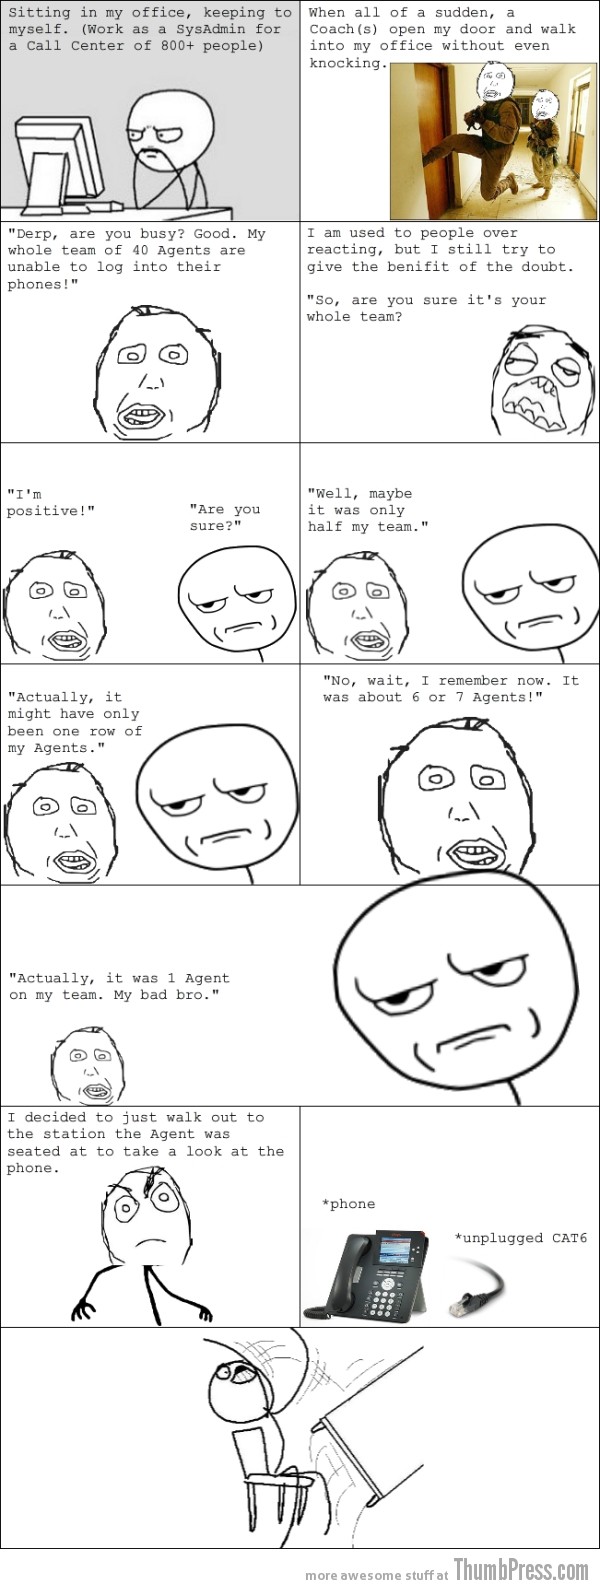 40 Agents Are Unable To Log Into Their Phones - Rage Comic